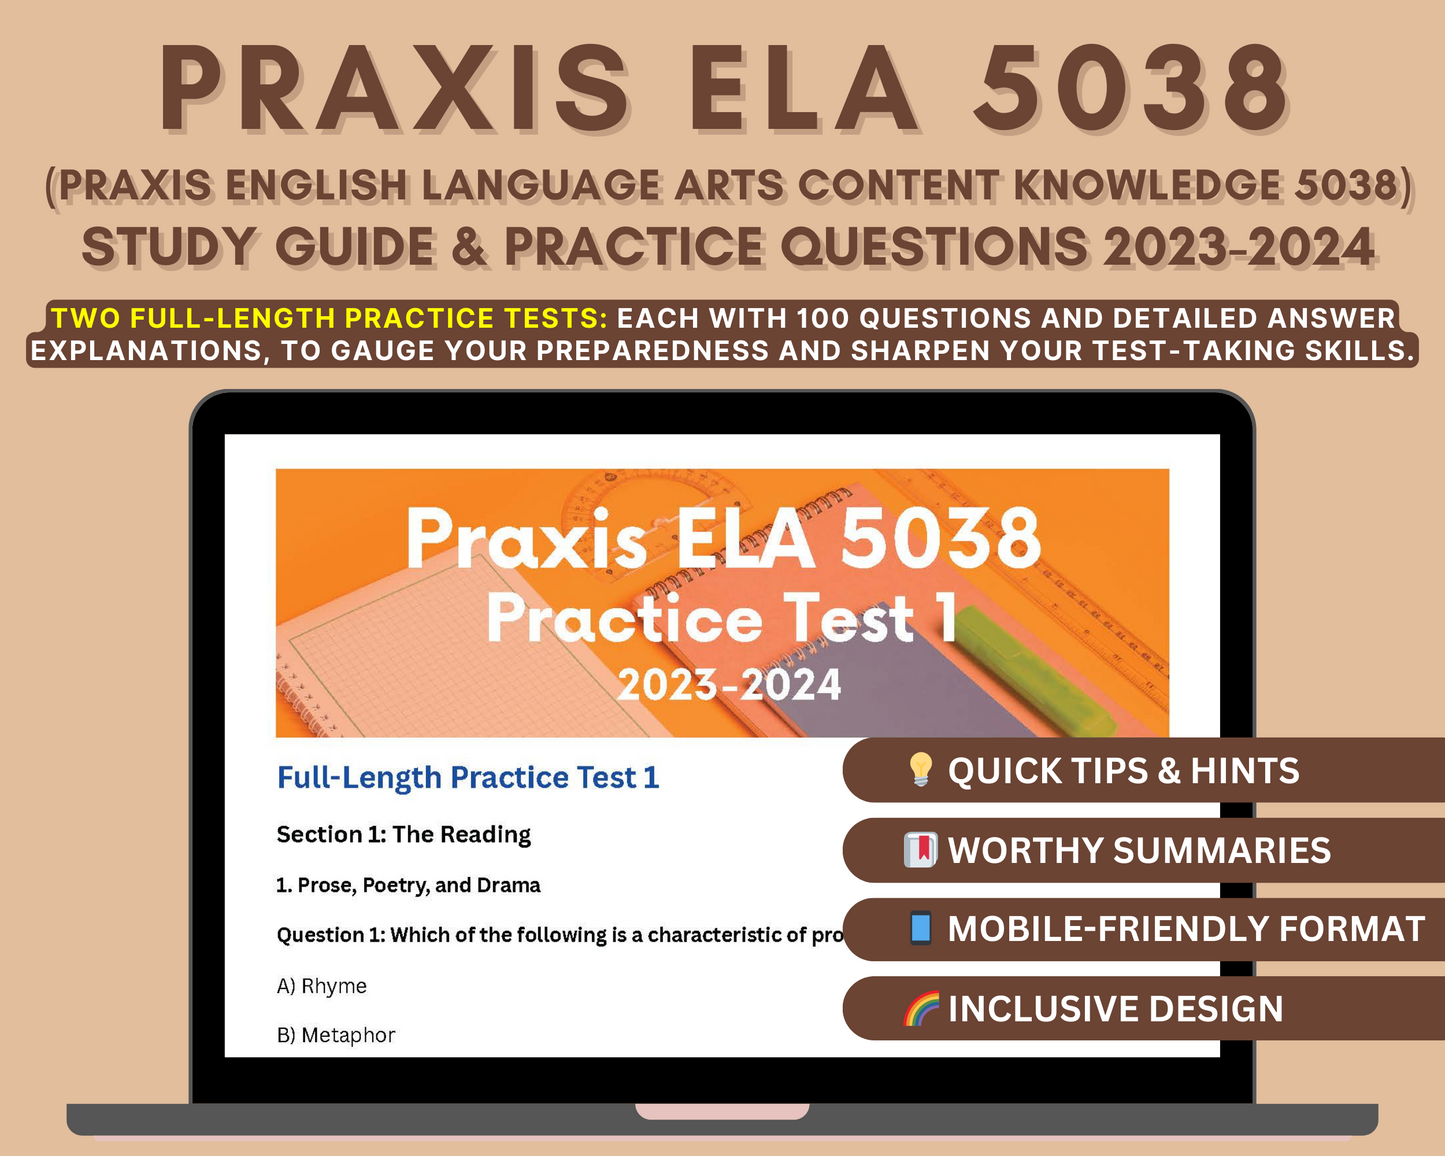 Praxis ELA 5038 Study Guide 2023-2024: Master English Language Arts with In-Depth Content Review, and Practice Tests